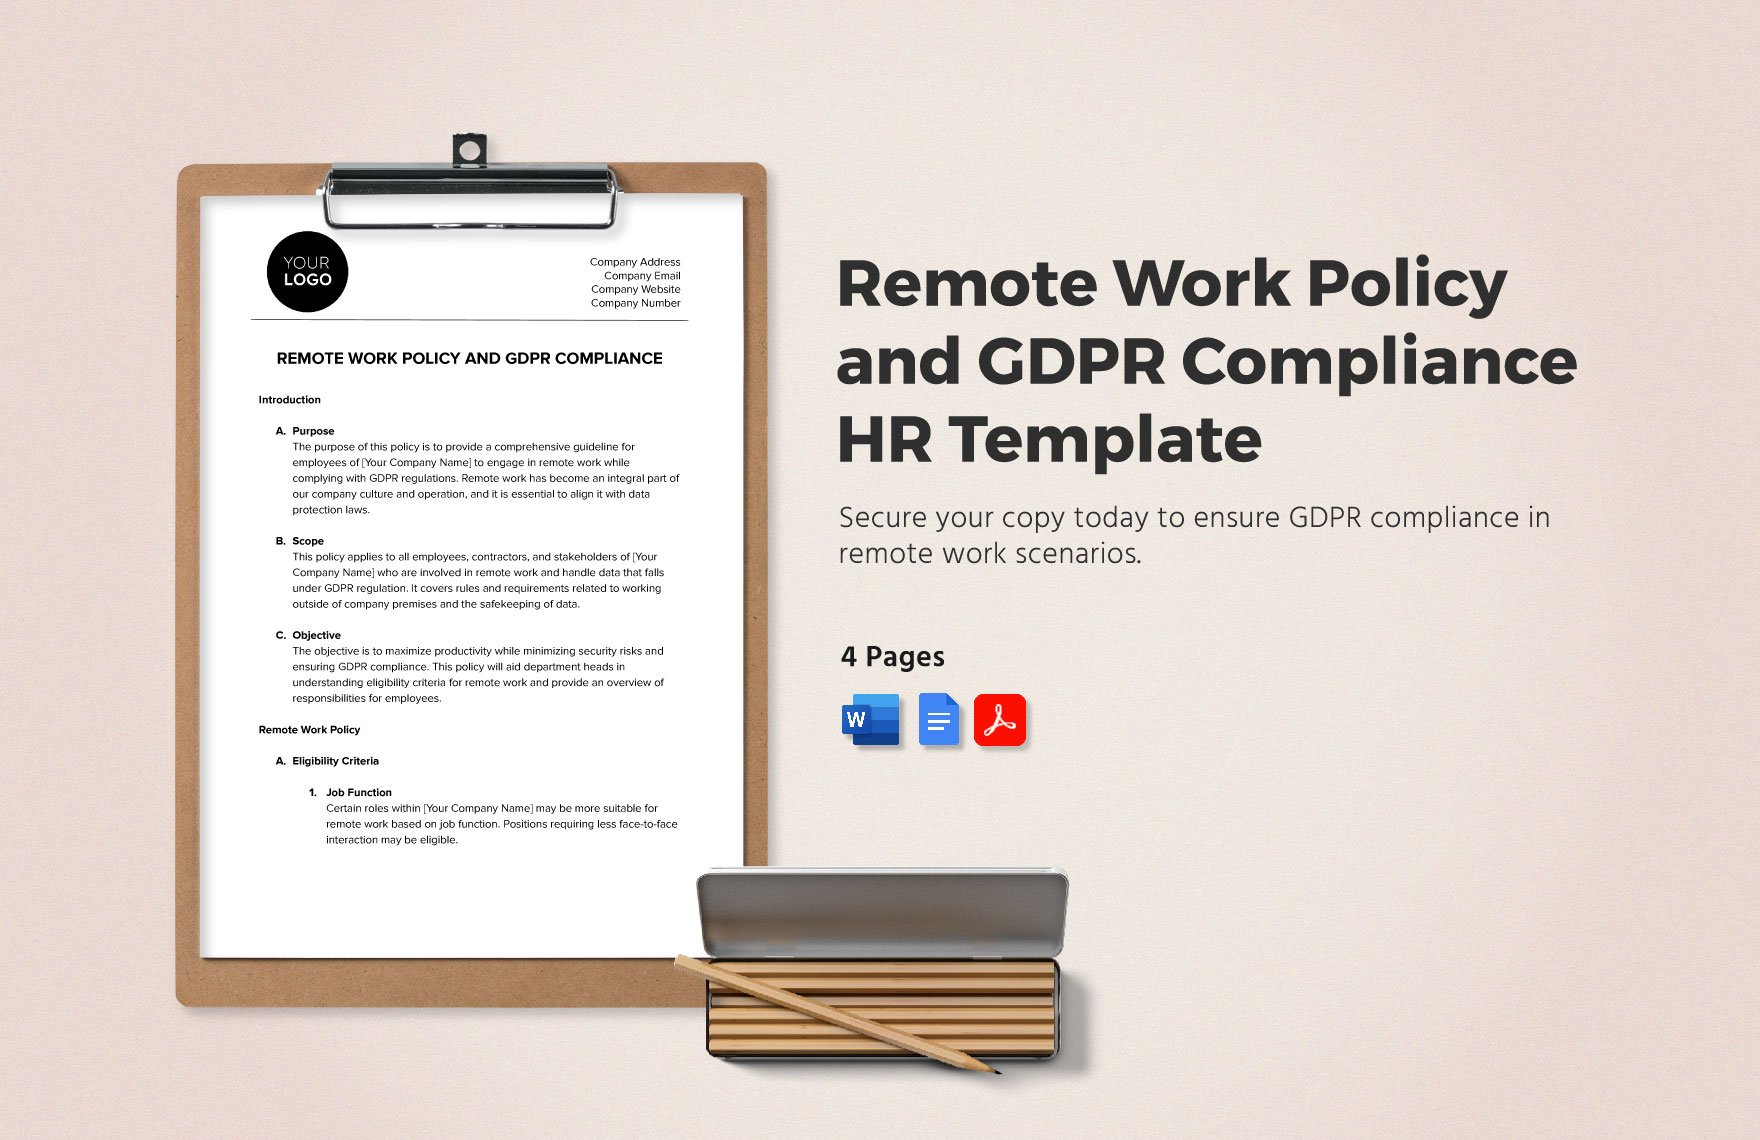 Remote Work Policy and GDPR Compliance HR Template